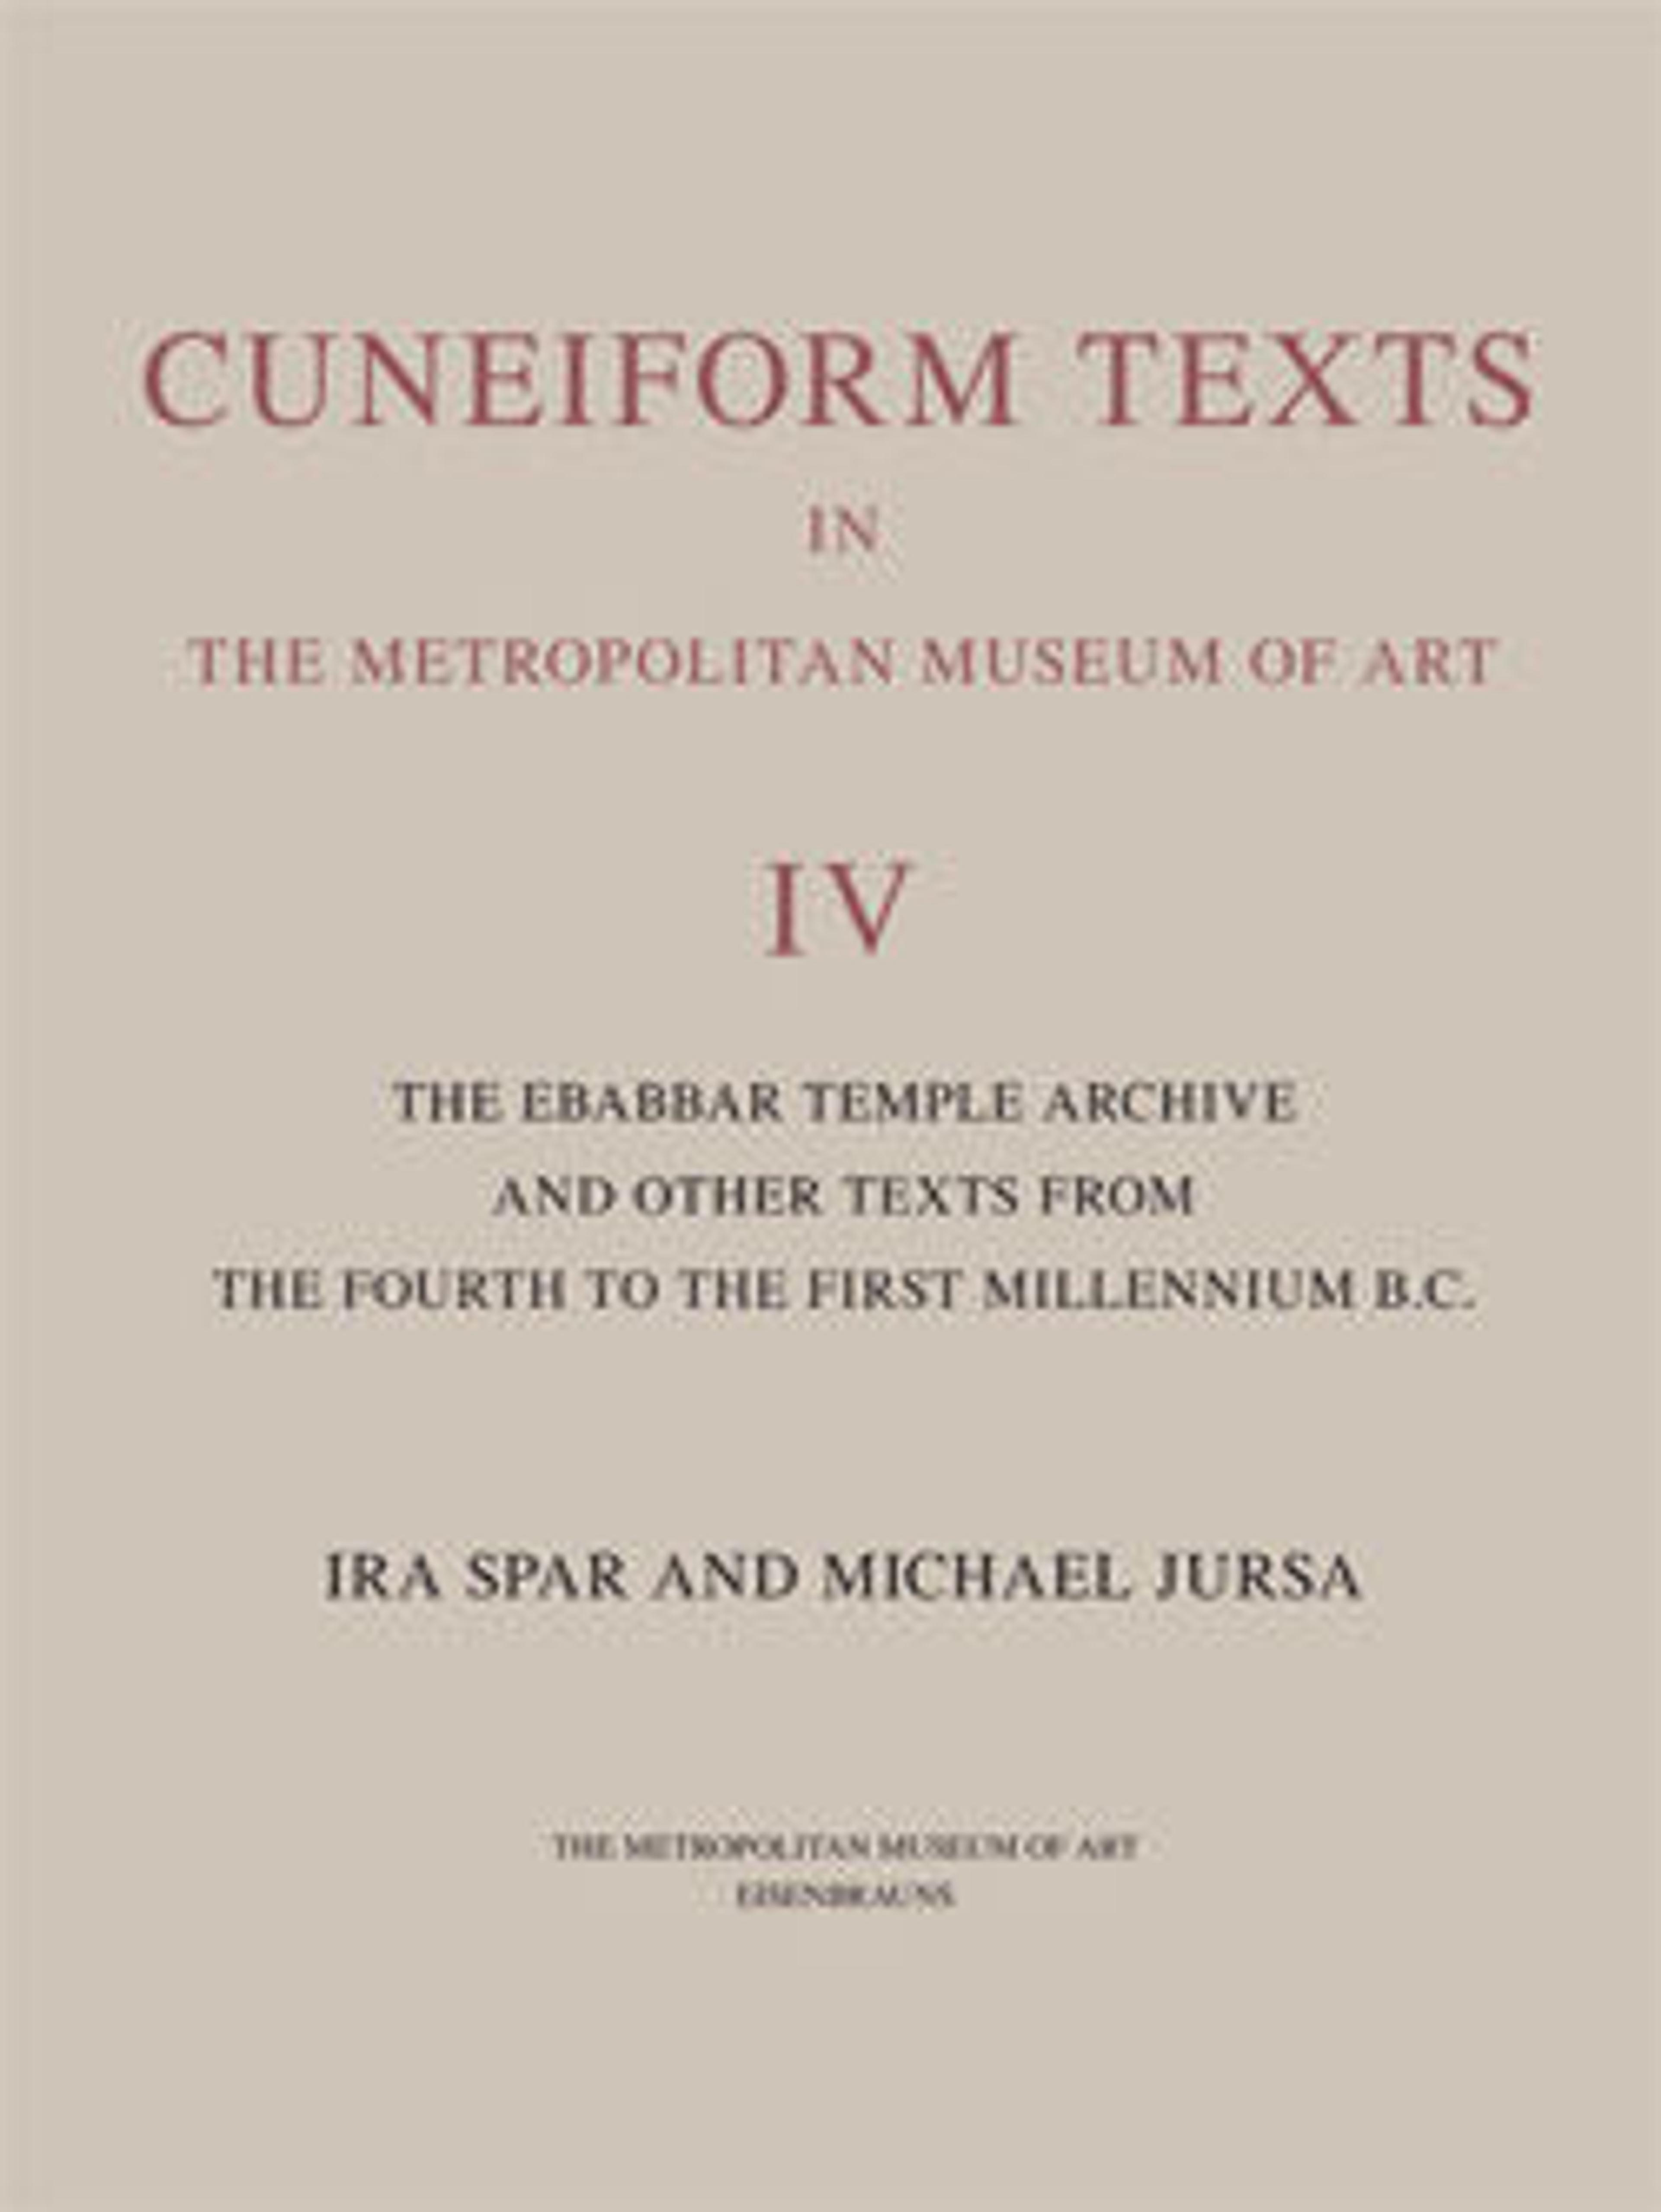 Cover of Cuneiform Texts in The Metropolitan Museum of Art Volume IV: The Ebabbar Temple Archive and Other Texts from the Fourth to the First Millenium B.C.